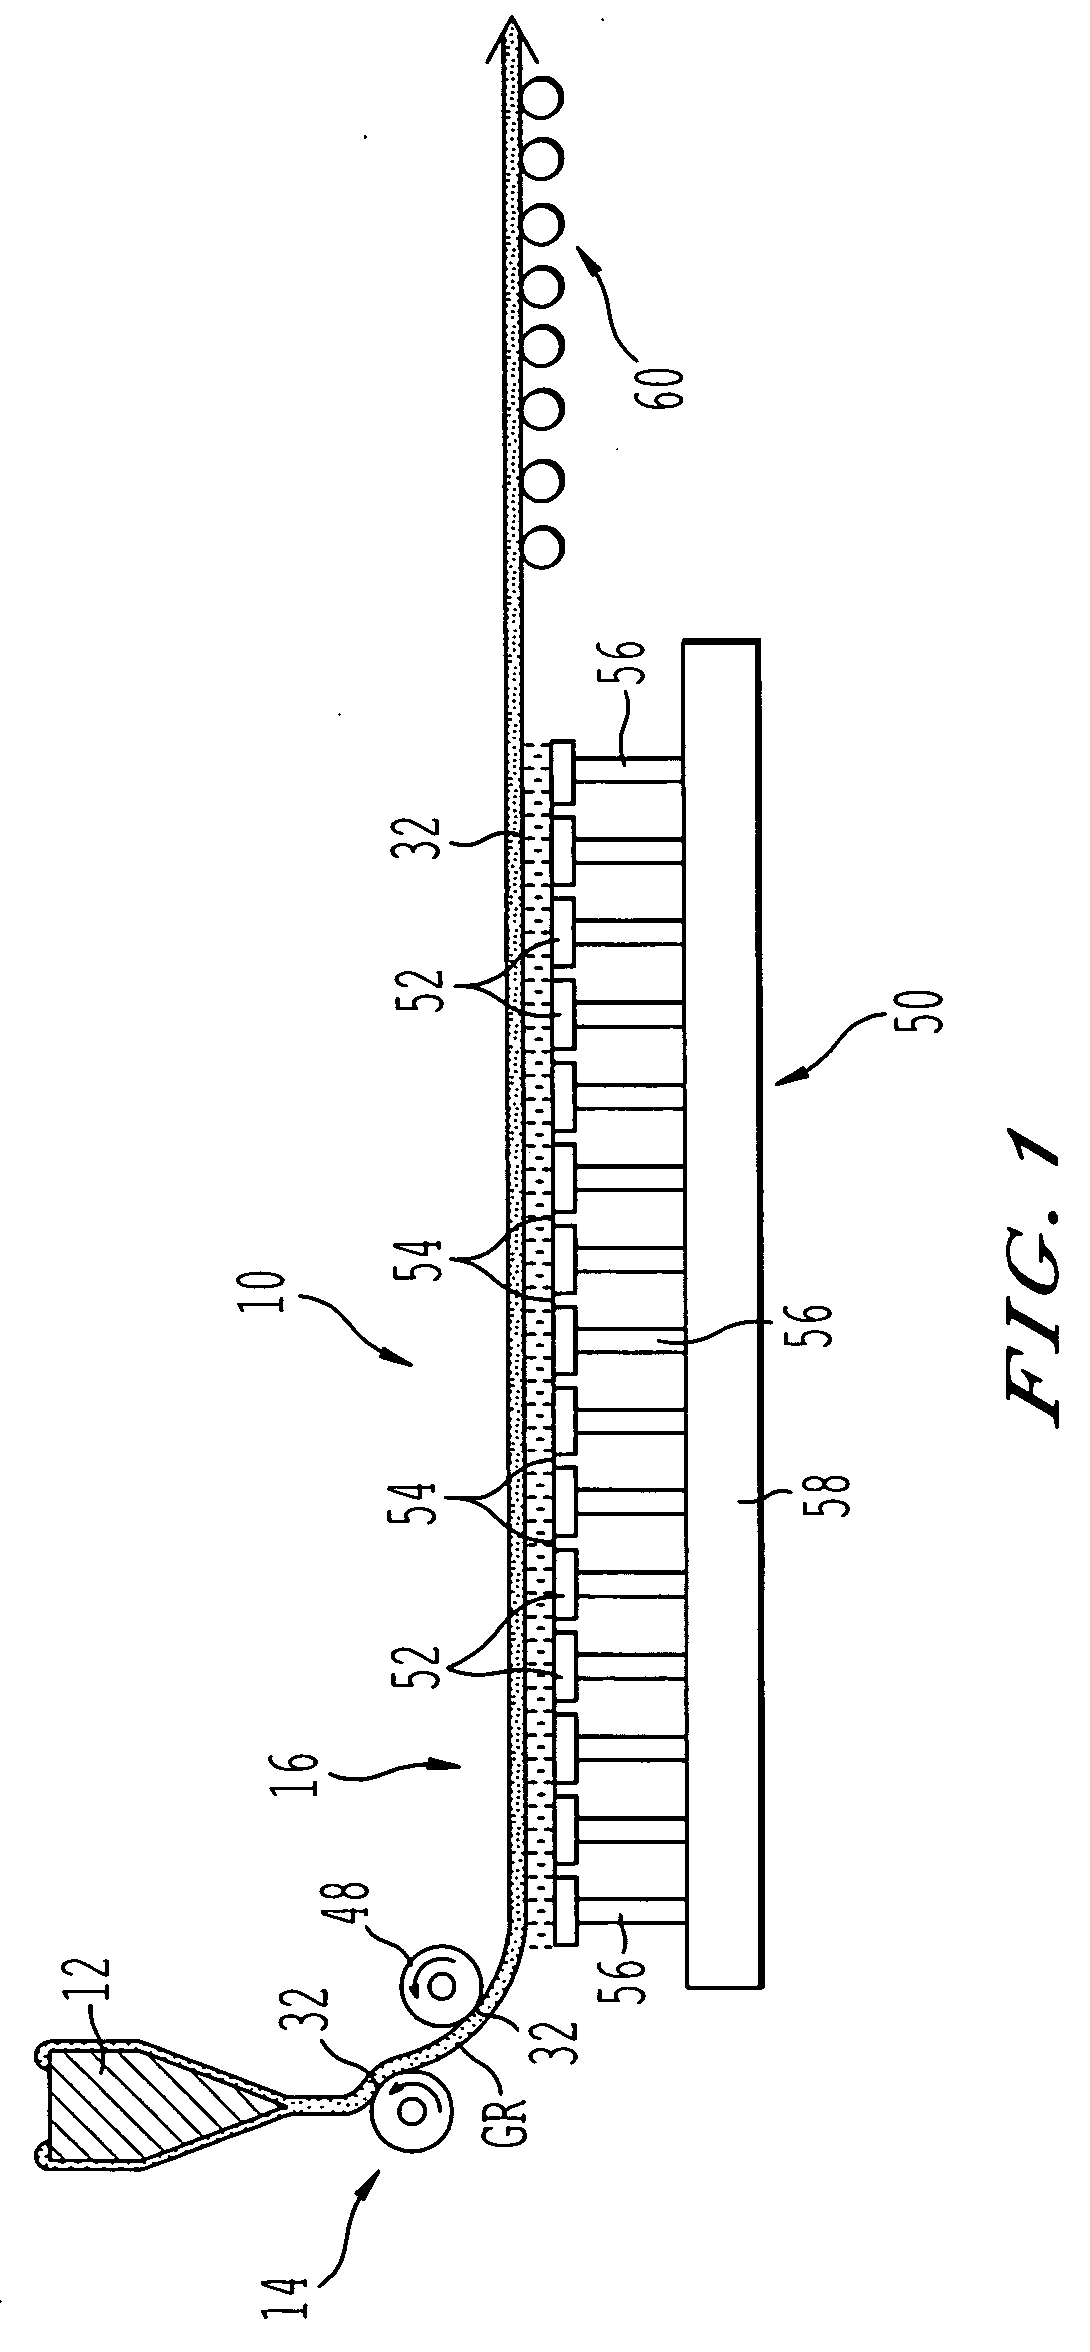 Apparatus for manufacturing sheet glass